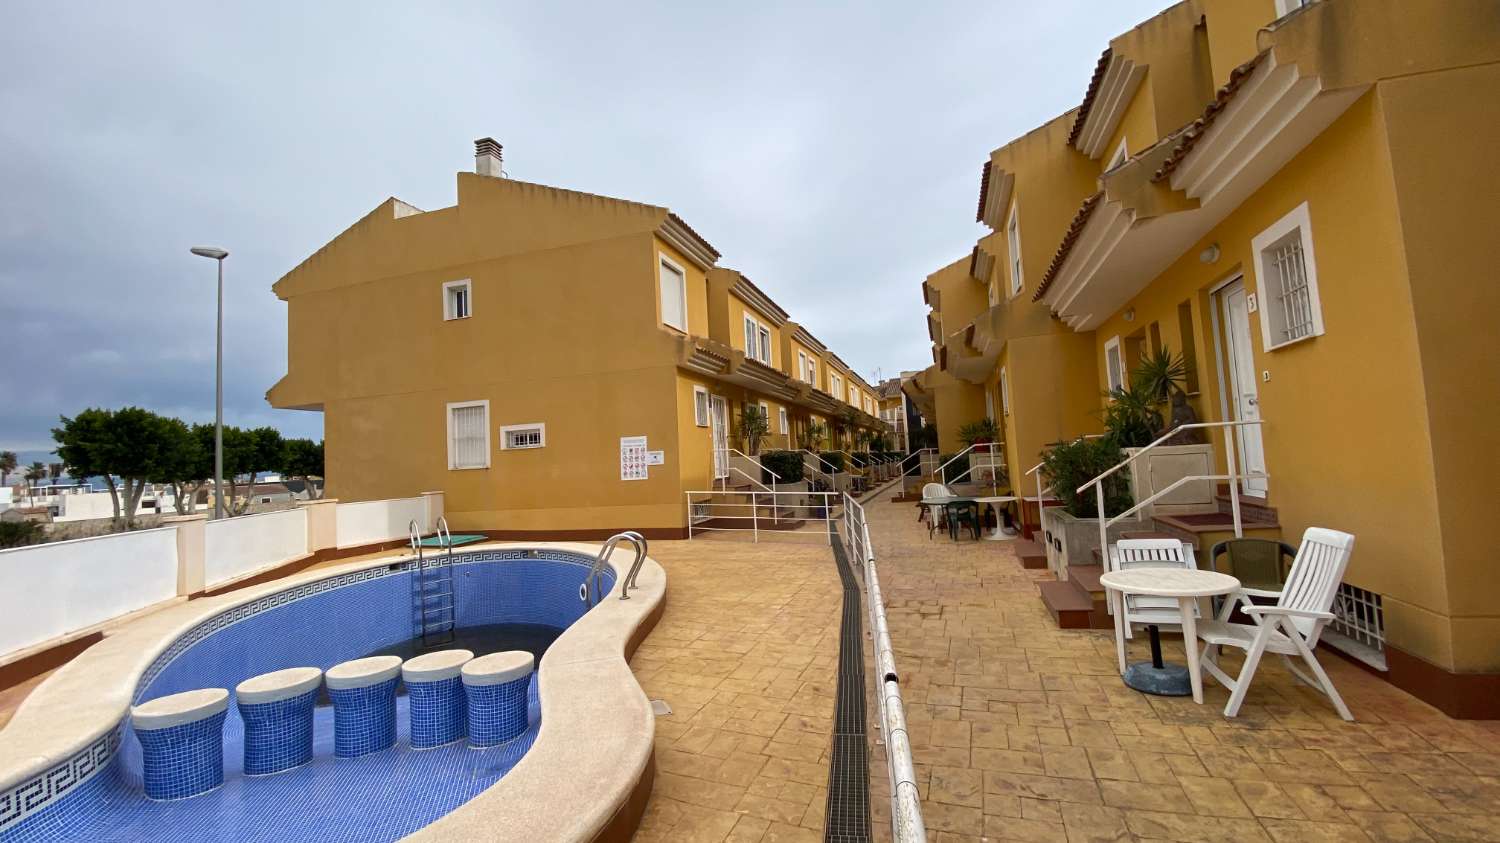 Duplex, with three floors. Two bedrooms, two bathrooms, living room, separate kitchen. Communal swimming pool. Garage and large covered porch with barbecue